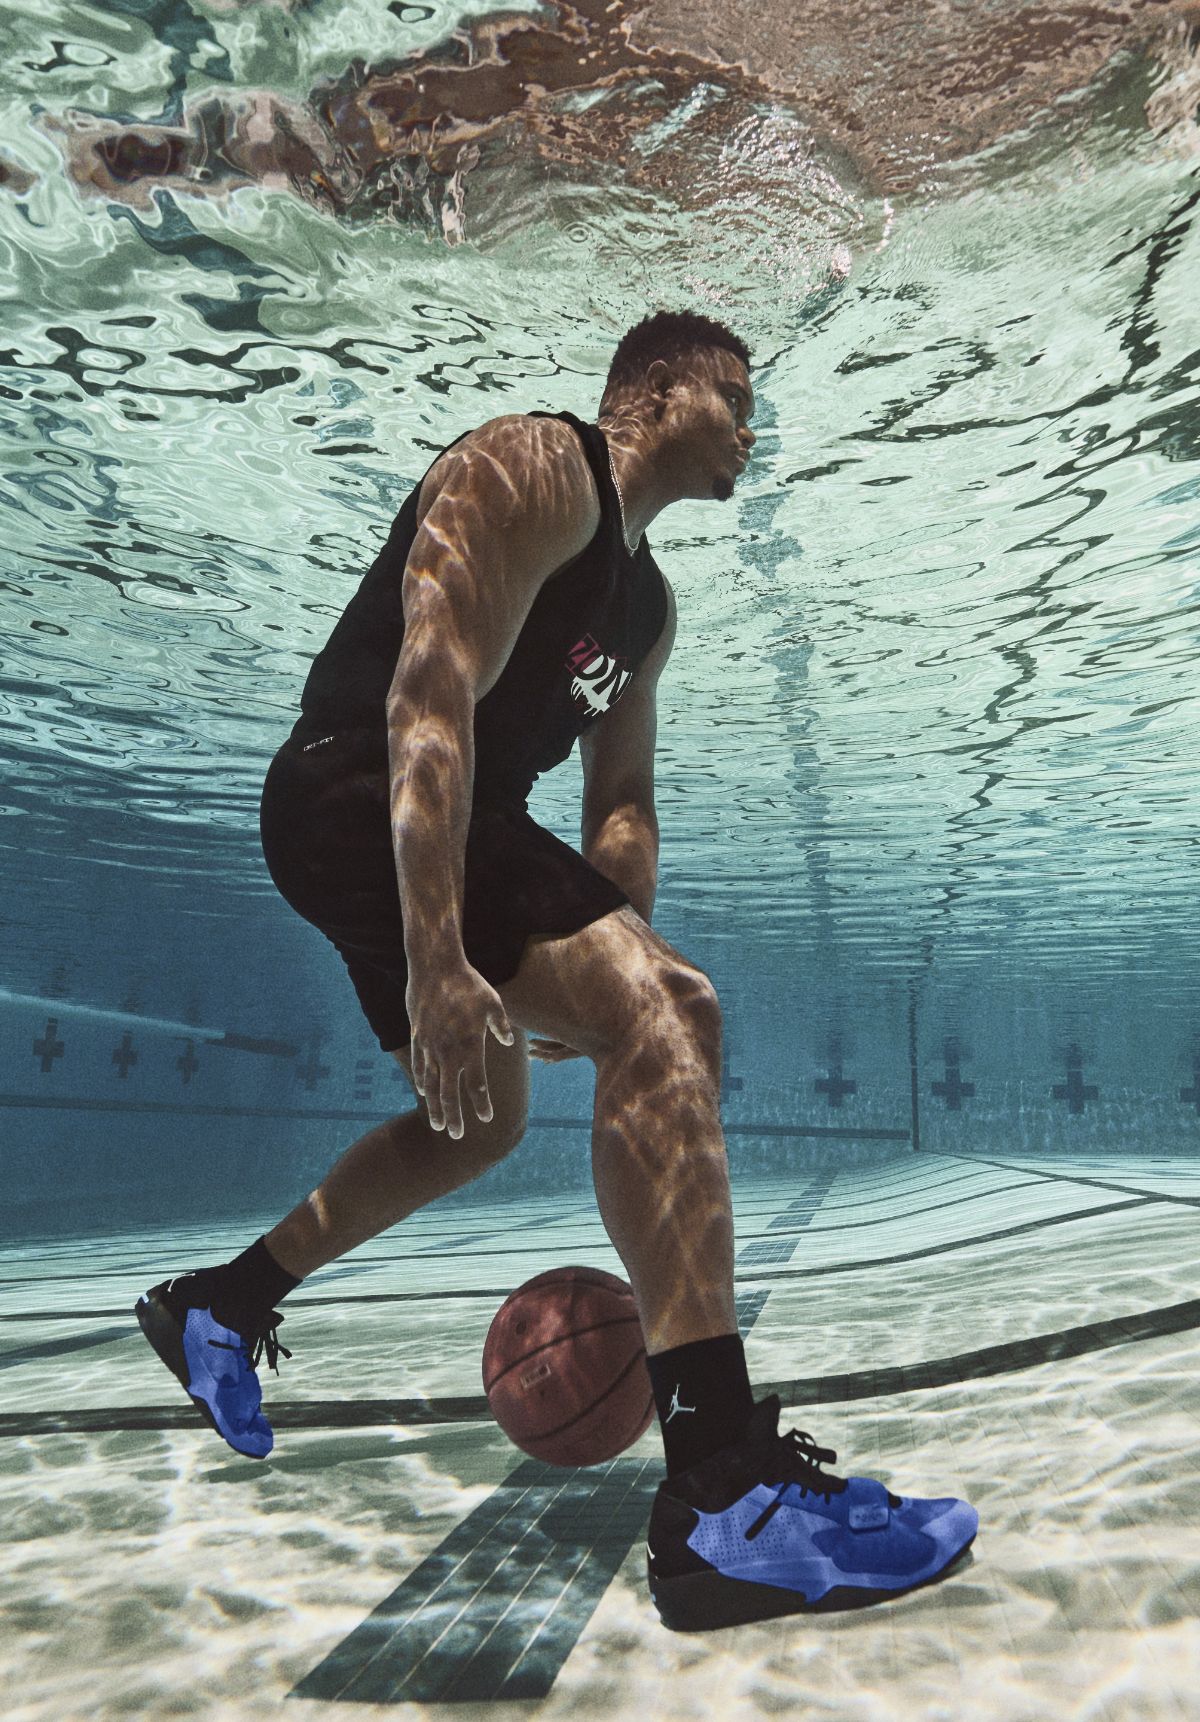 Zion dribbling basketball on bottom of swimming pool wearing blue Nike Zion 2 sneakers